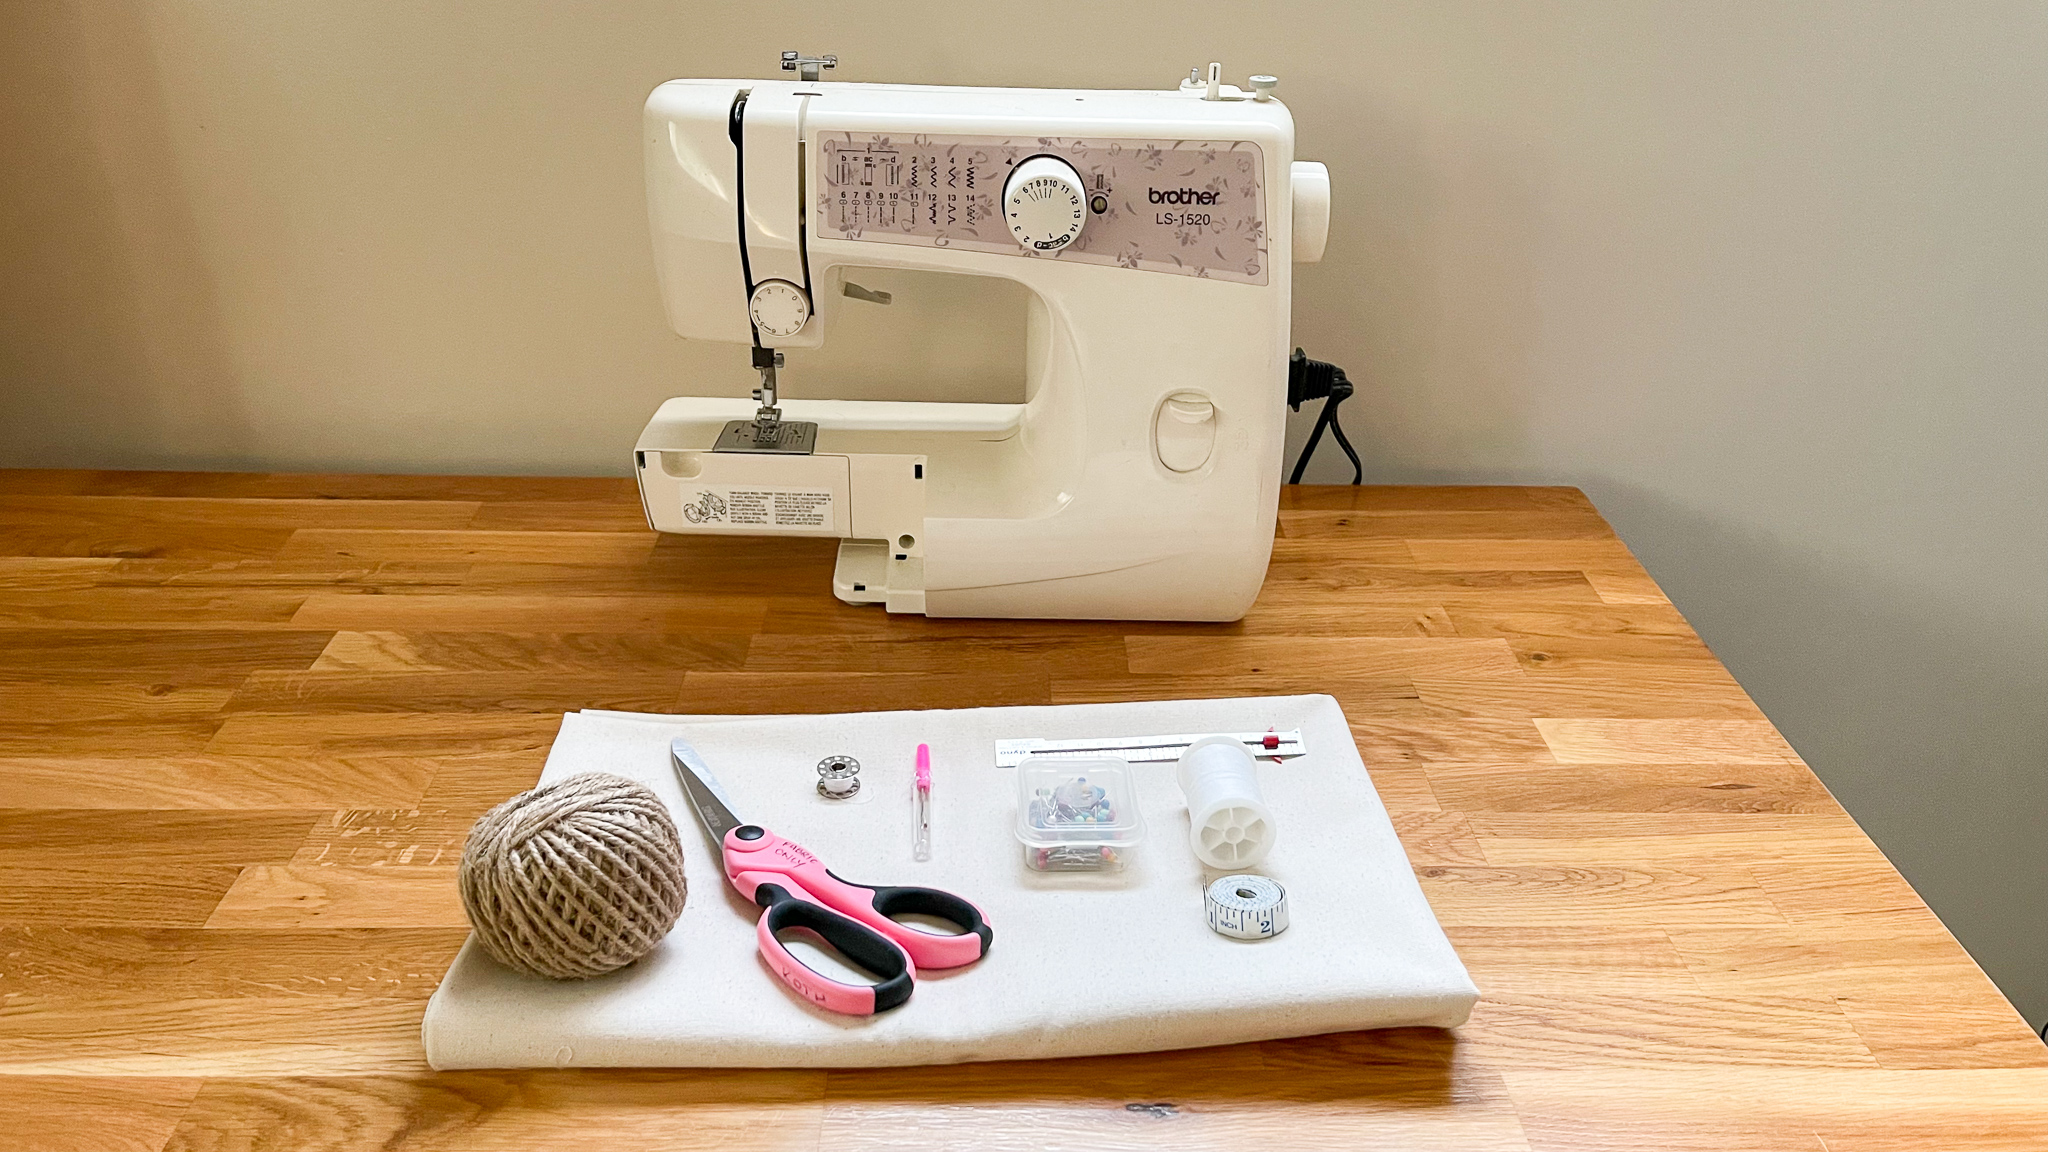 Simplay3's garden seat diy: sewing machine with supplies listed above set before it. 